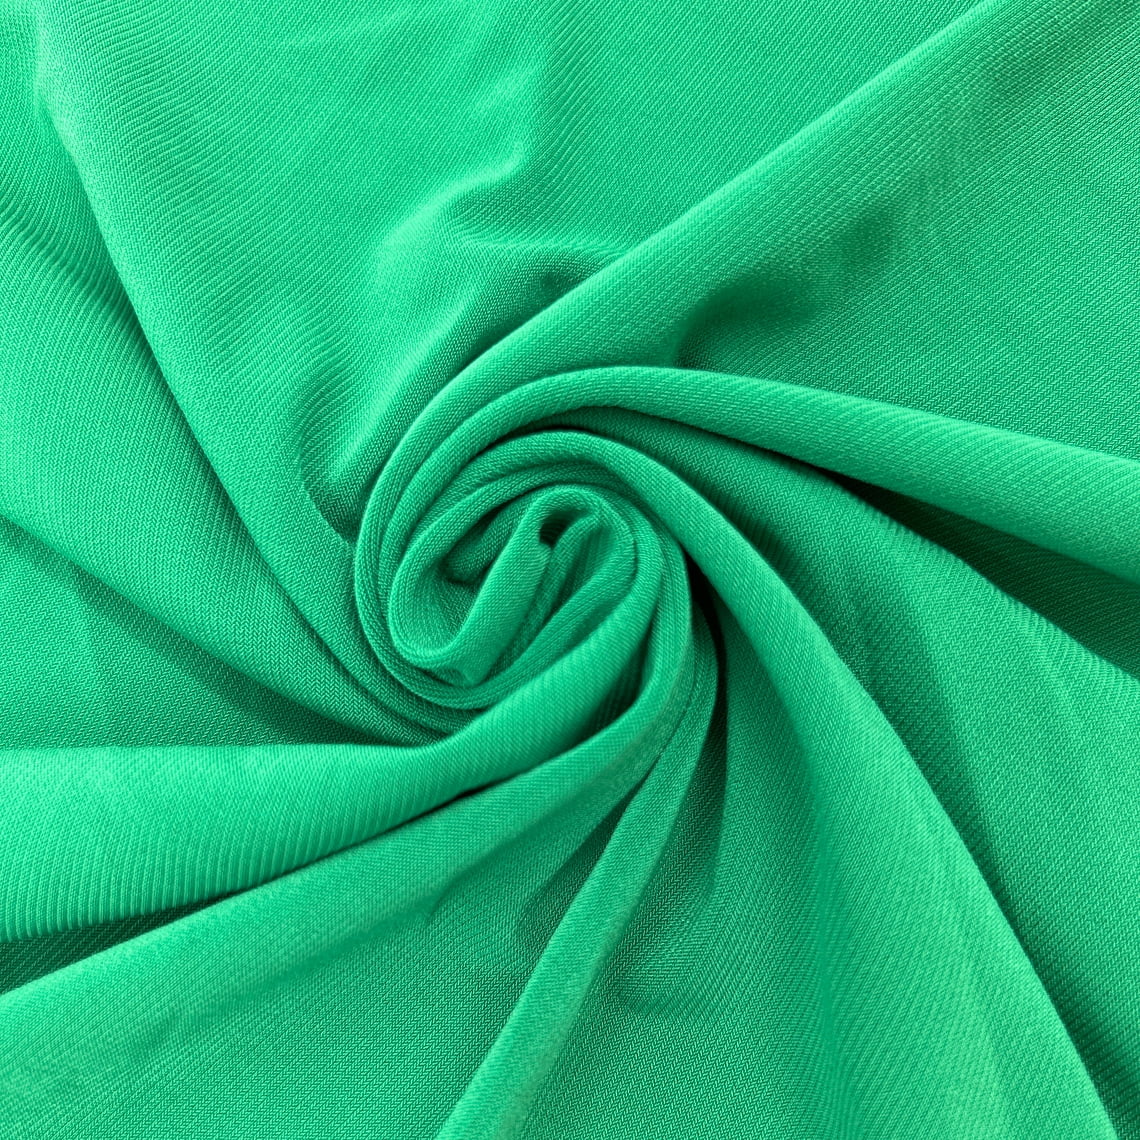 Good Fluorescent Green Swimsuit Fabric Material 4 Ways Stretch Knit Spandex/Cotton  Fabric Diy Sewing Summer Swimsuit/Sportswear - AliExpress